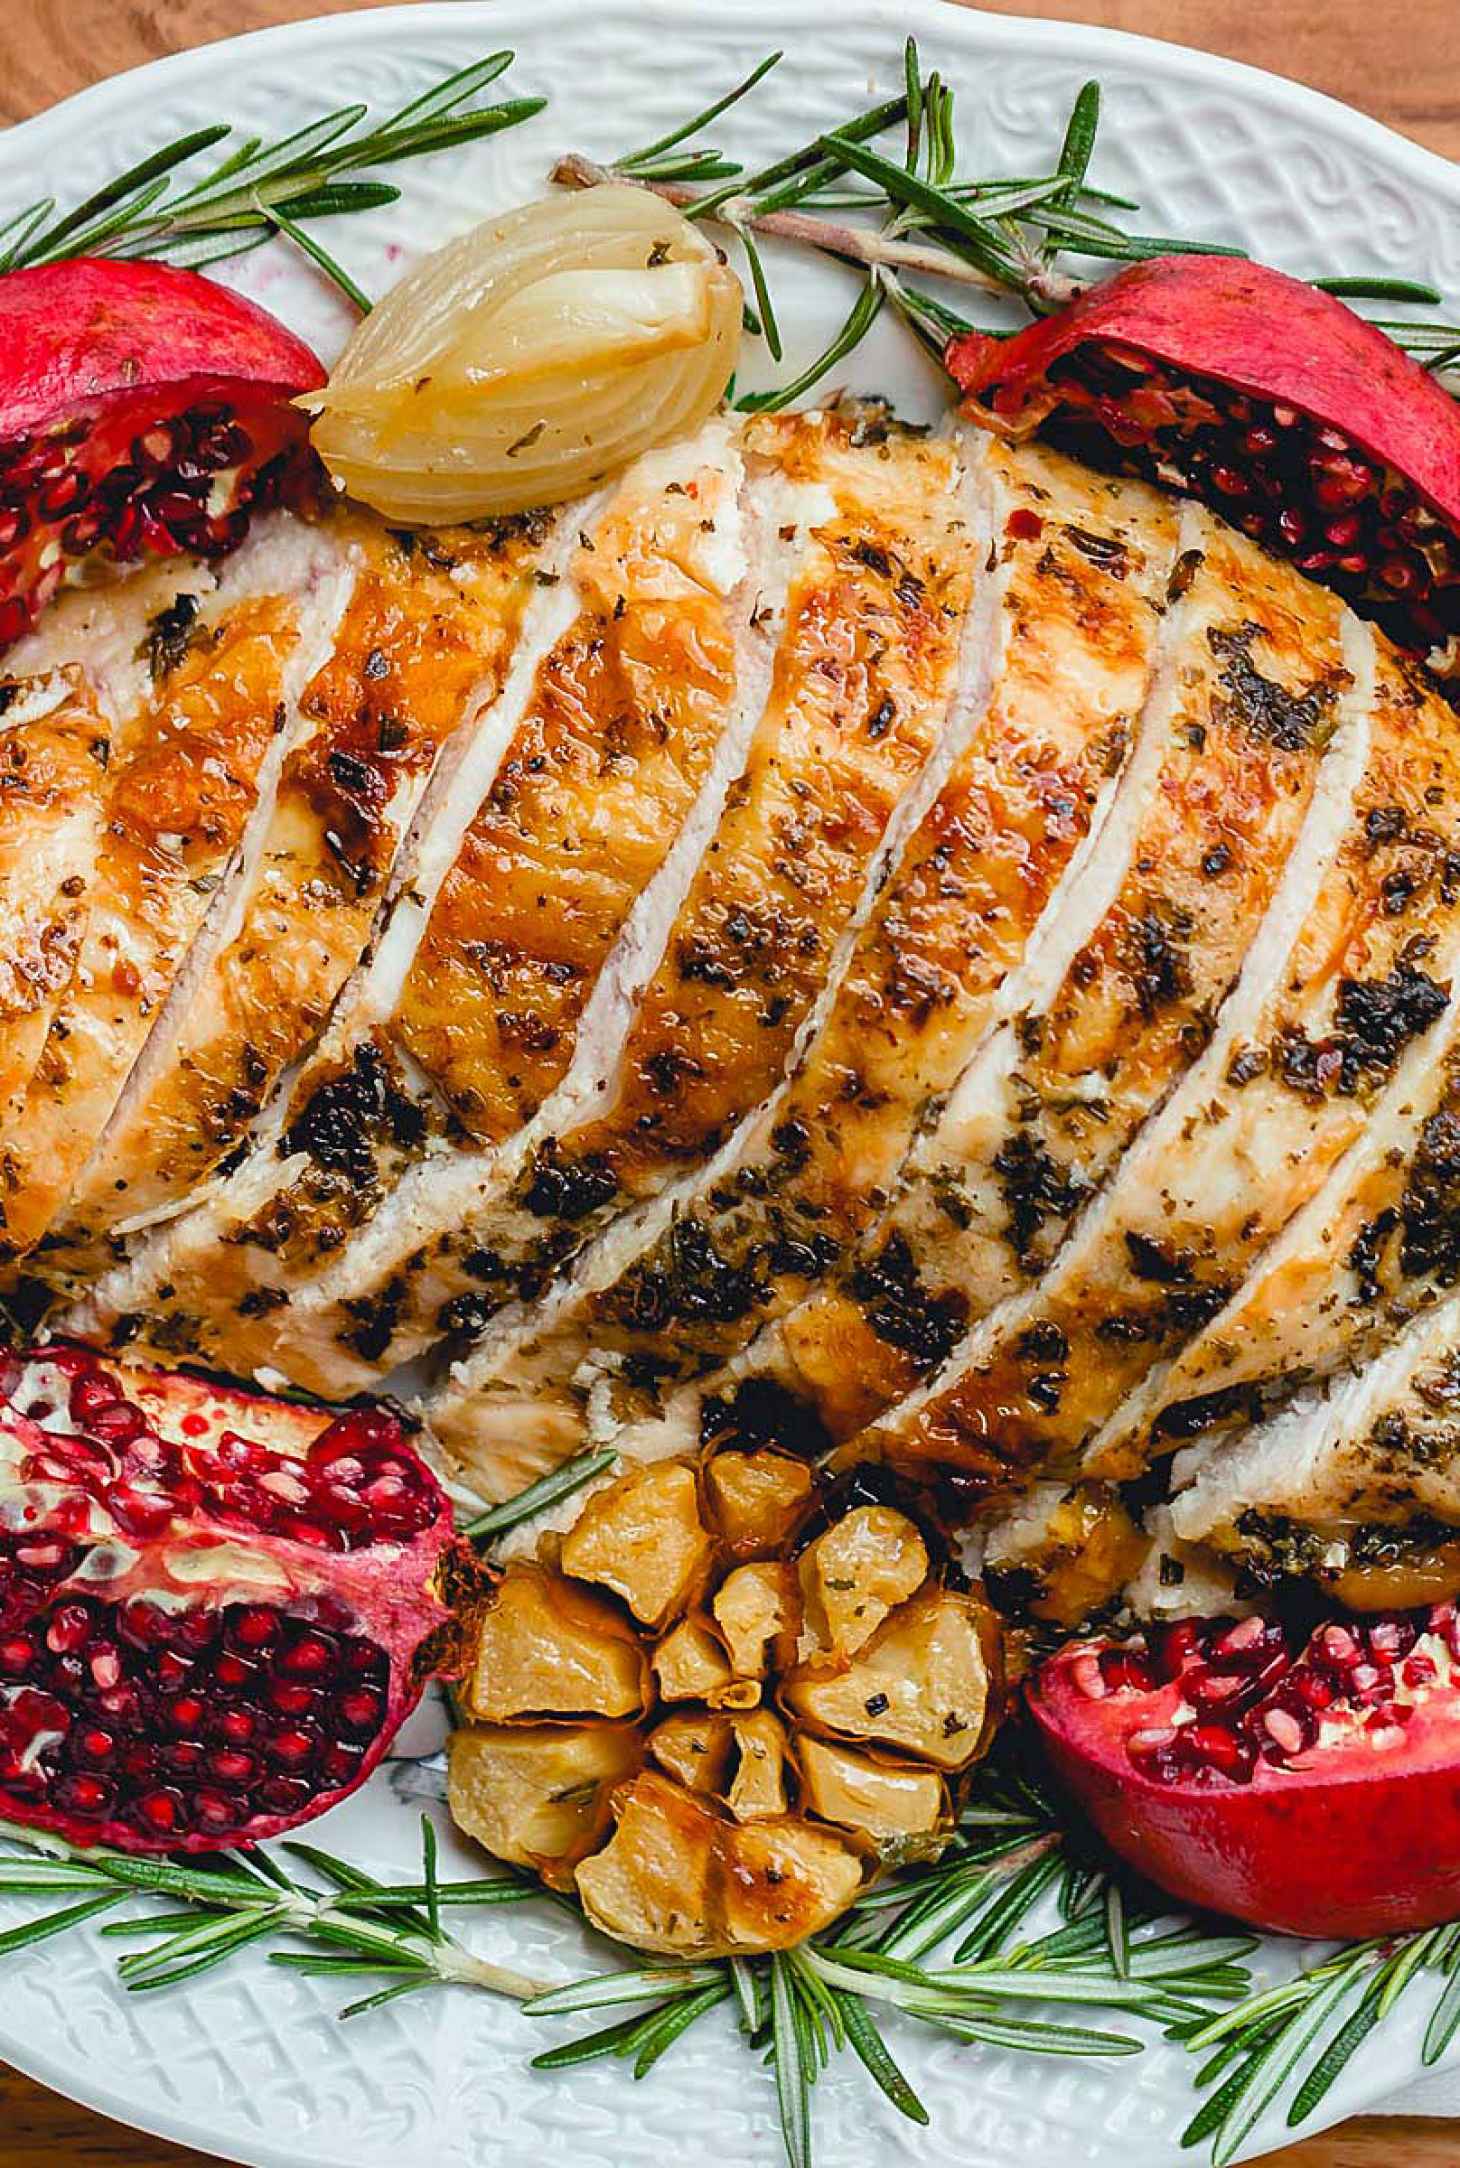 Roasted Turkey Breast With Garlic Herb Butter 1460x2168 